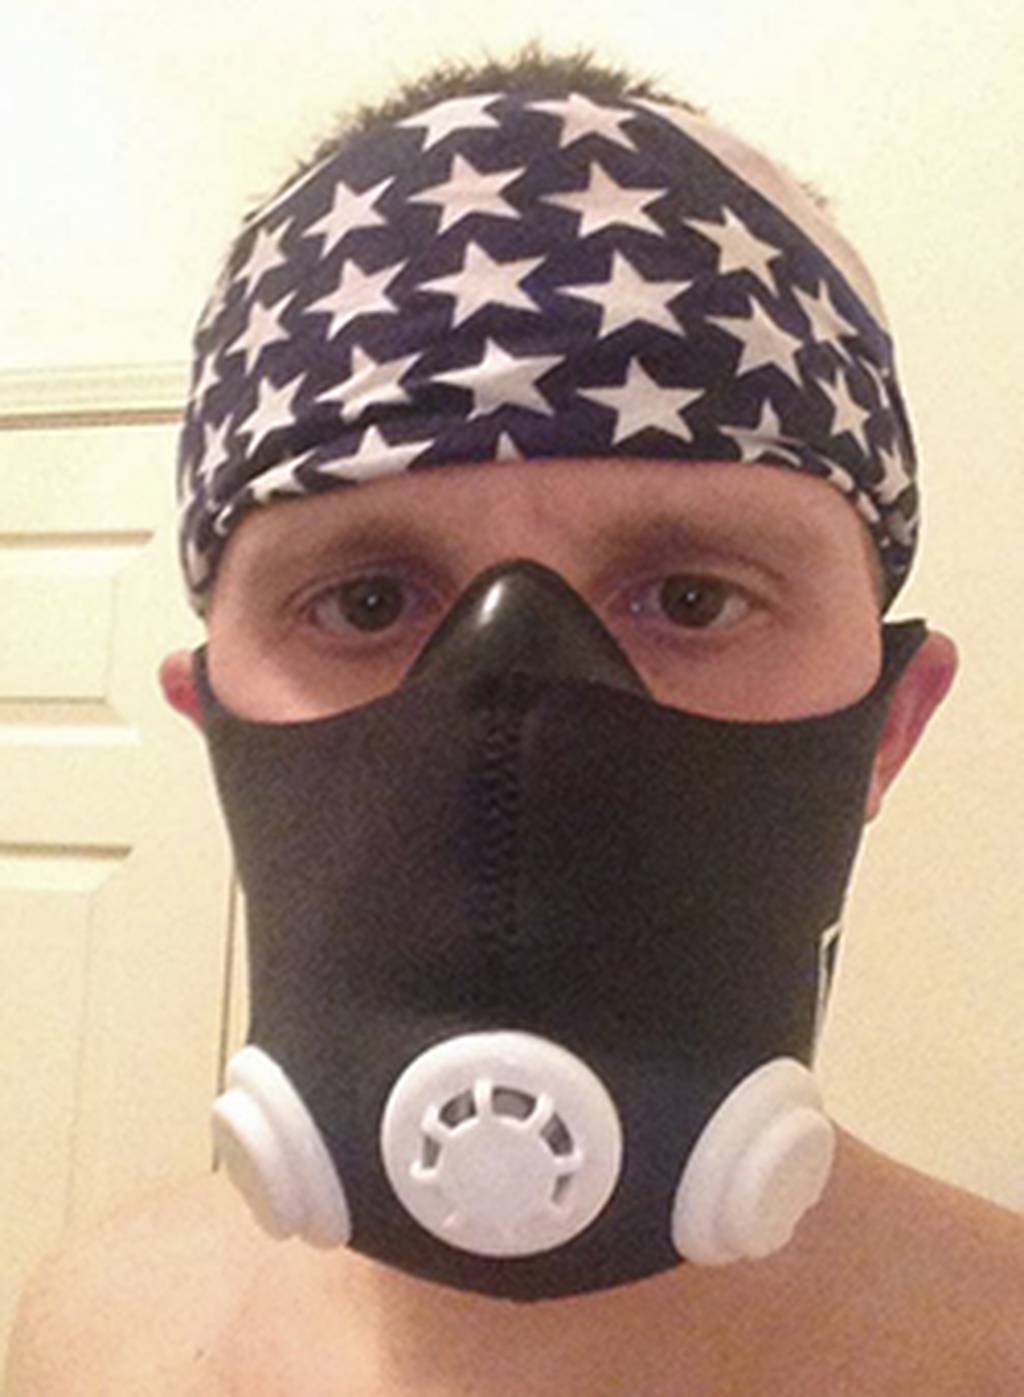 Elevation training masks: Bringing the mountains to sea level and